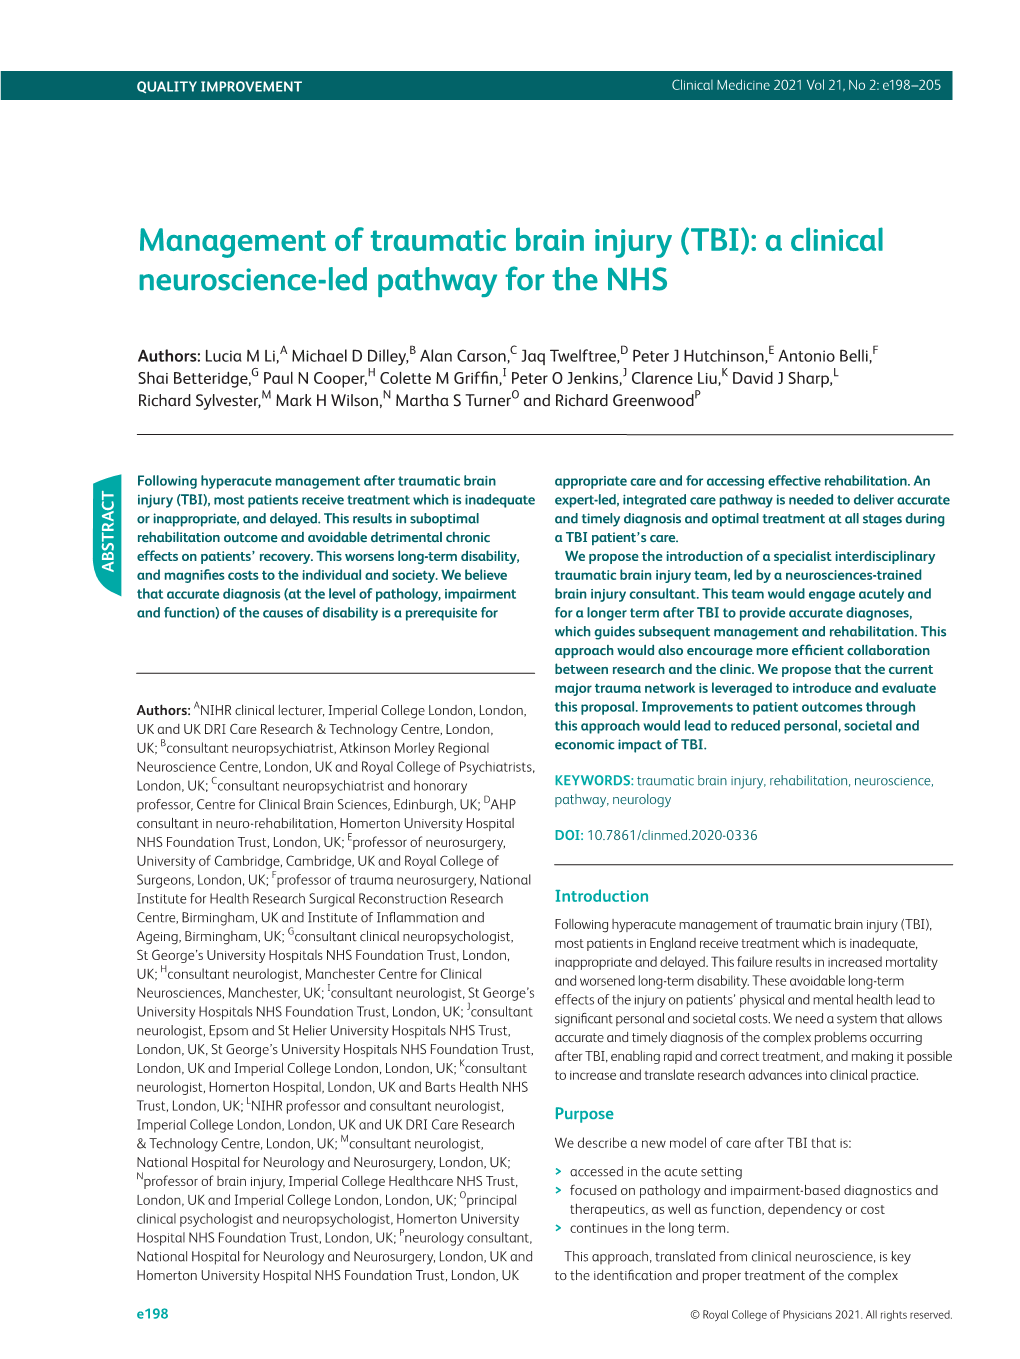 Management of Traumatic Brain Injury (TBI): a Clinical Neuroscience-Led Pathway for the NHS